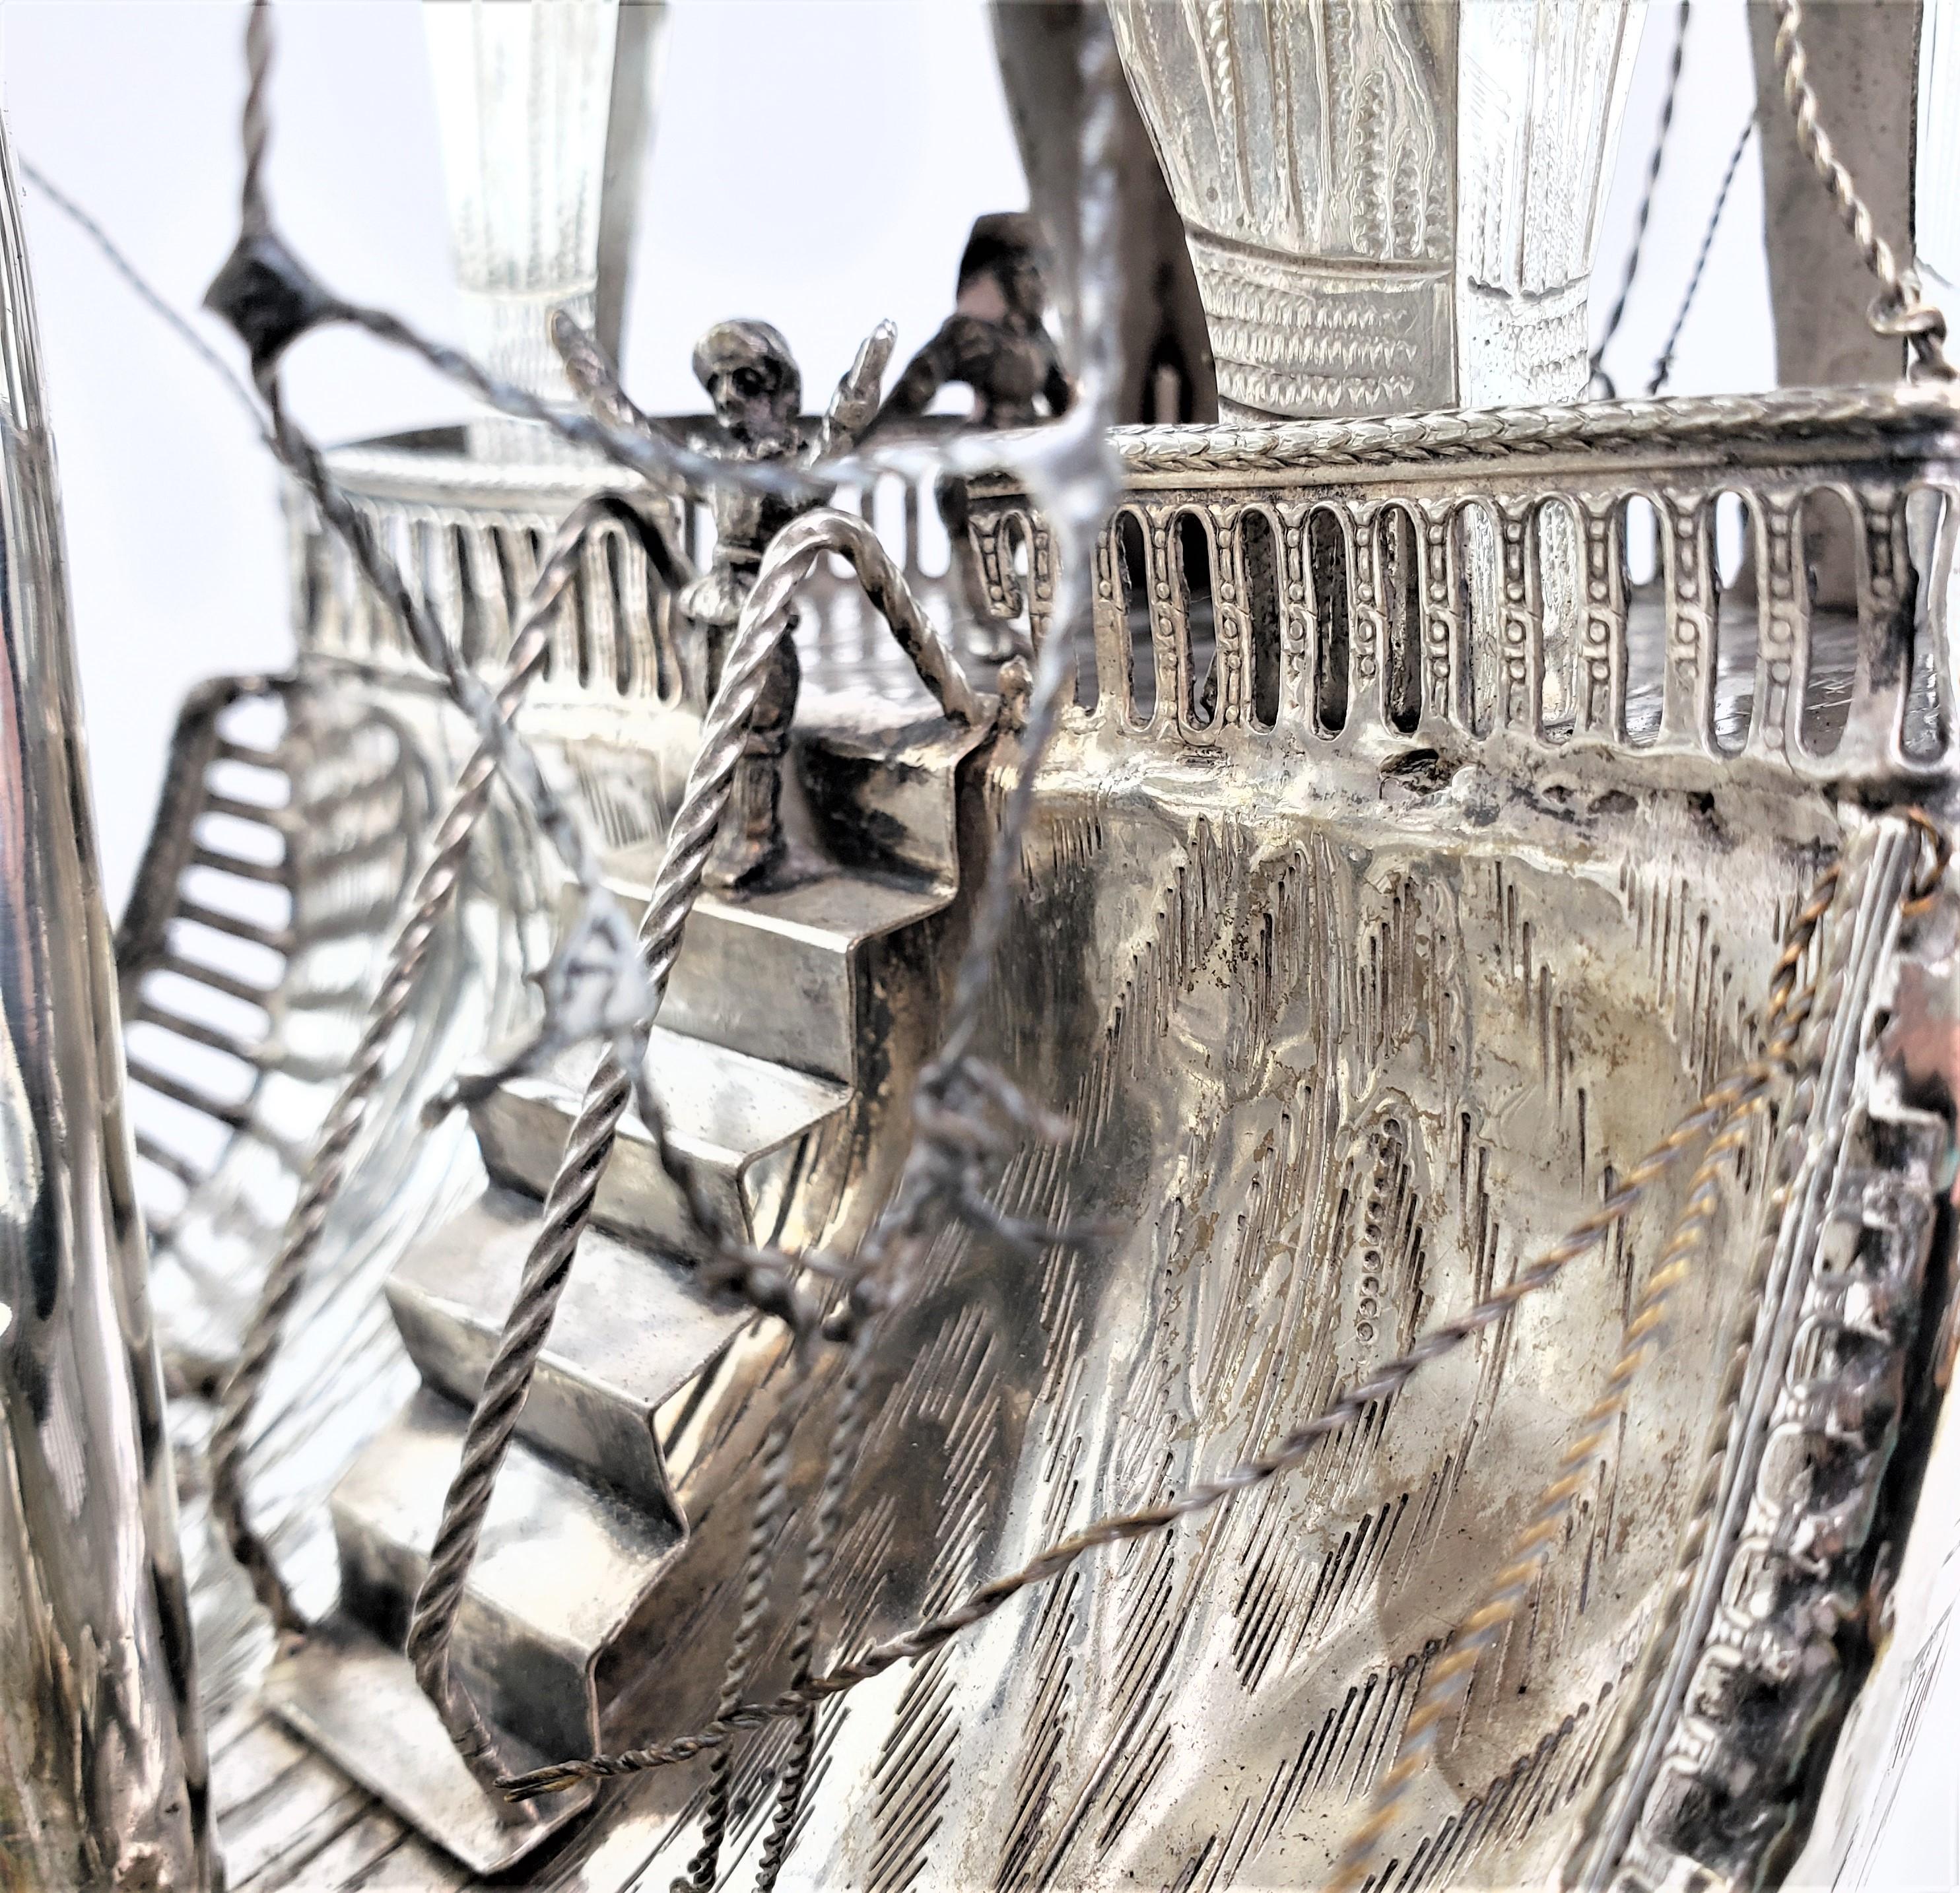 Large Antique Silver Plated Nef or 3 Mast Sailing Ship Sculpture or Centerpiece For Sale 10